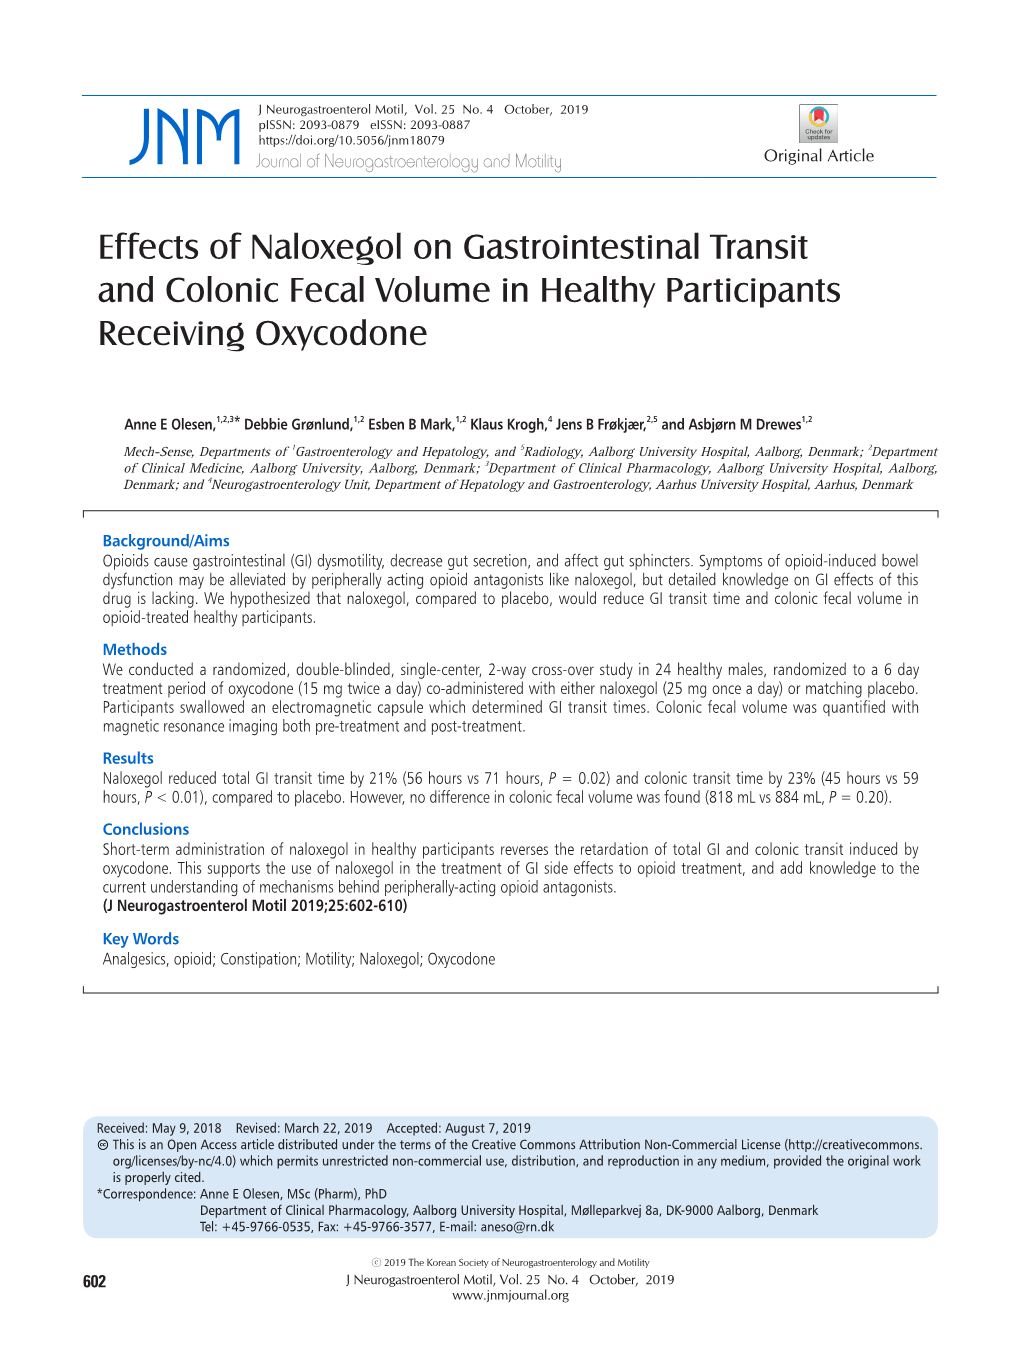 Effects of Naloxegol on Gastrointestinal Transit and Colonic Fecal Volume in Healthy Participants Receiving Oxycodone